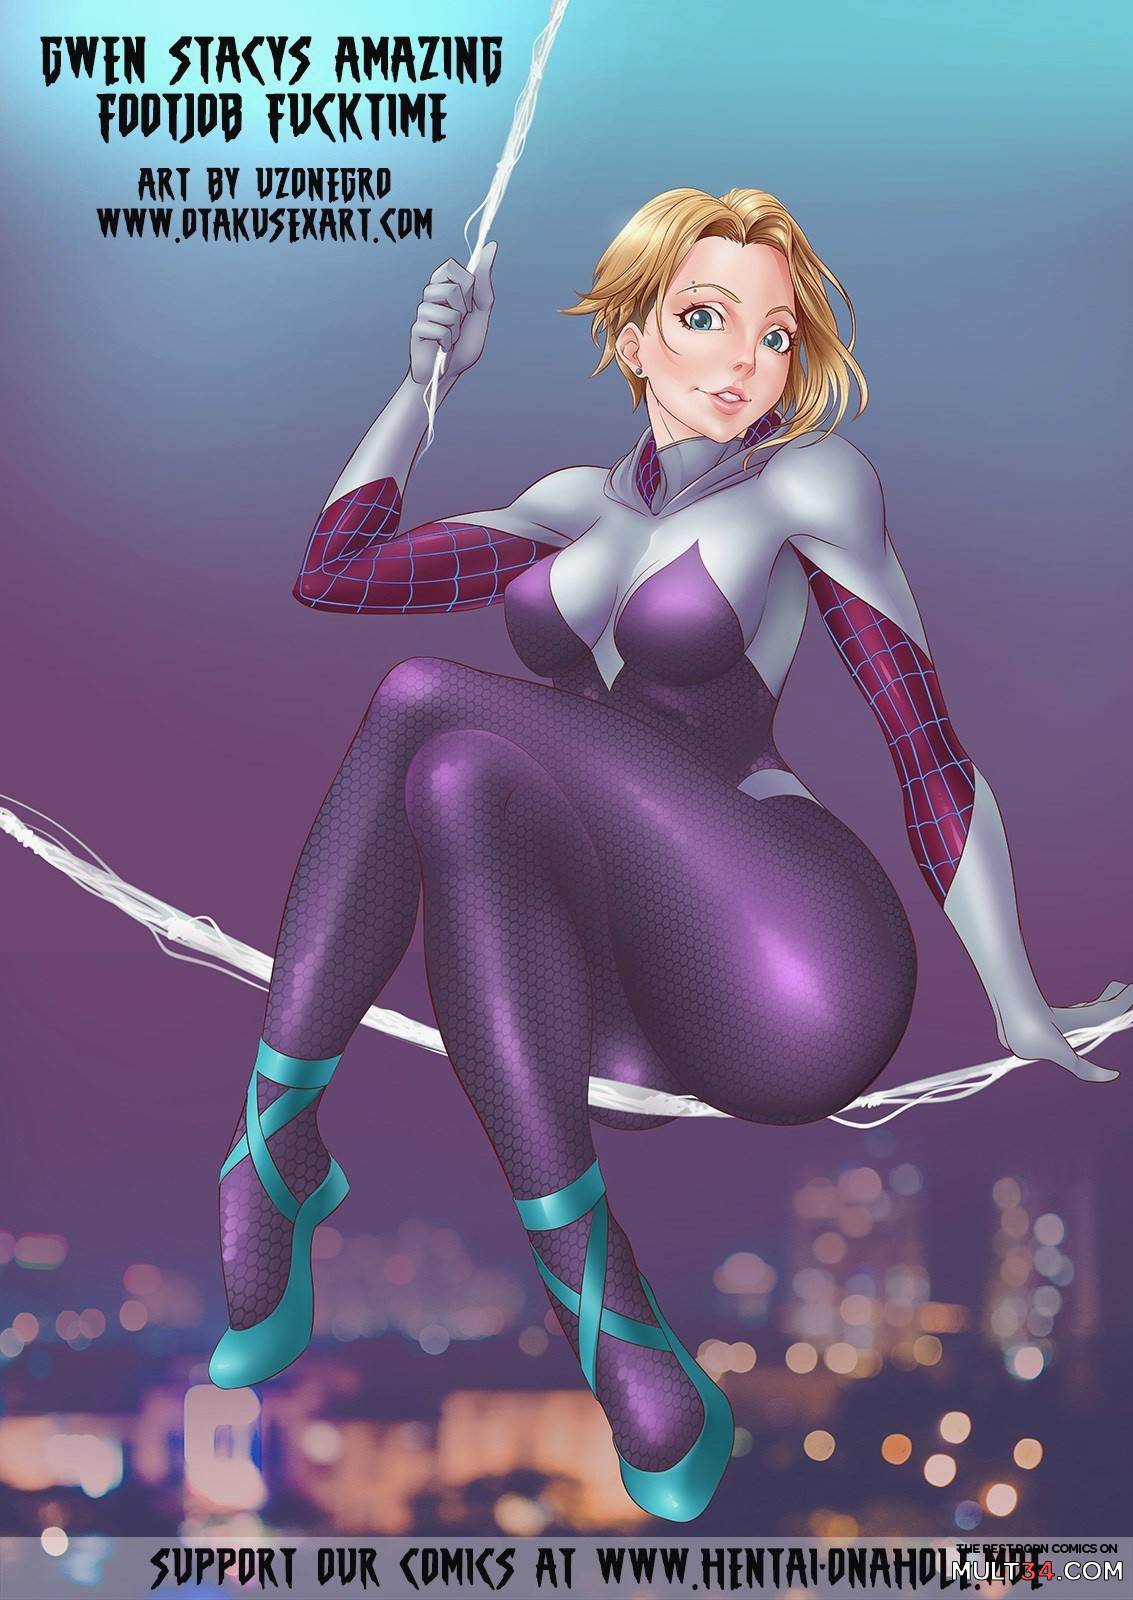 Gwen Stacy's Amazing Footjob Fucktime page 1